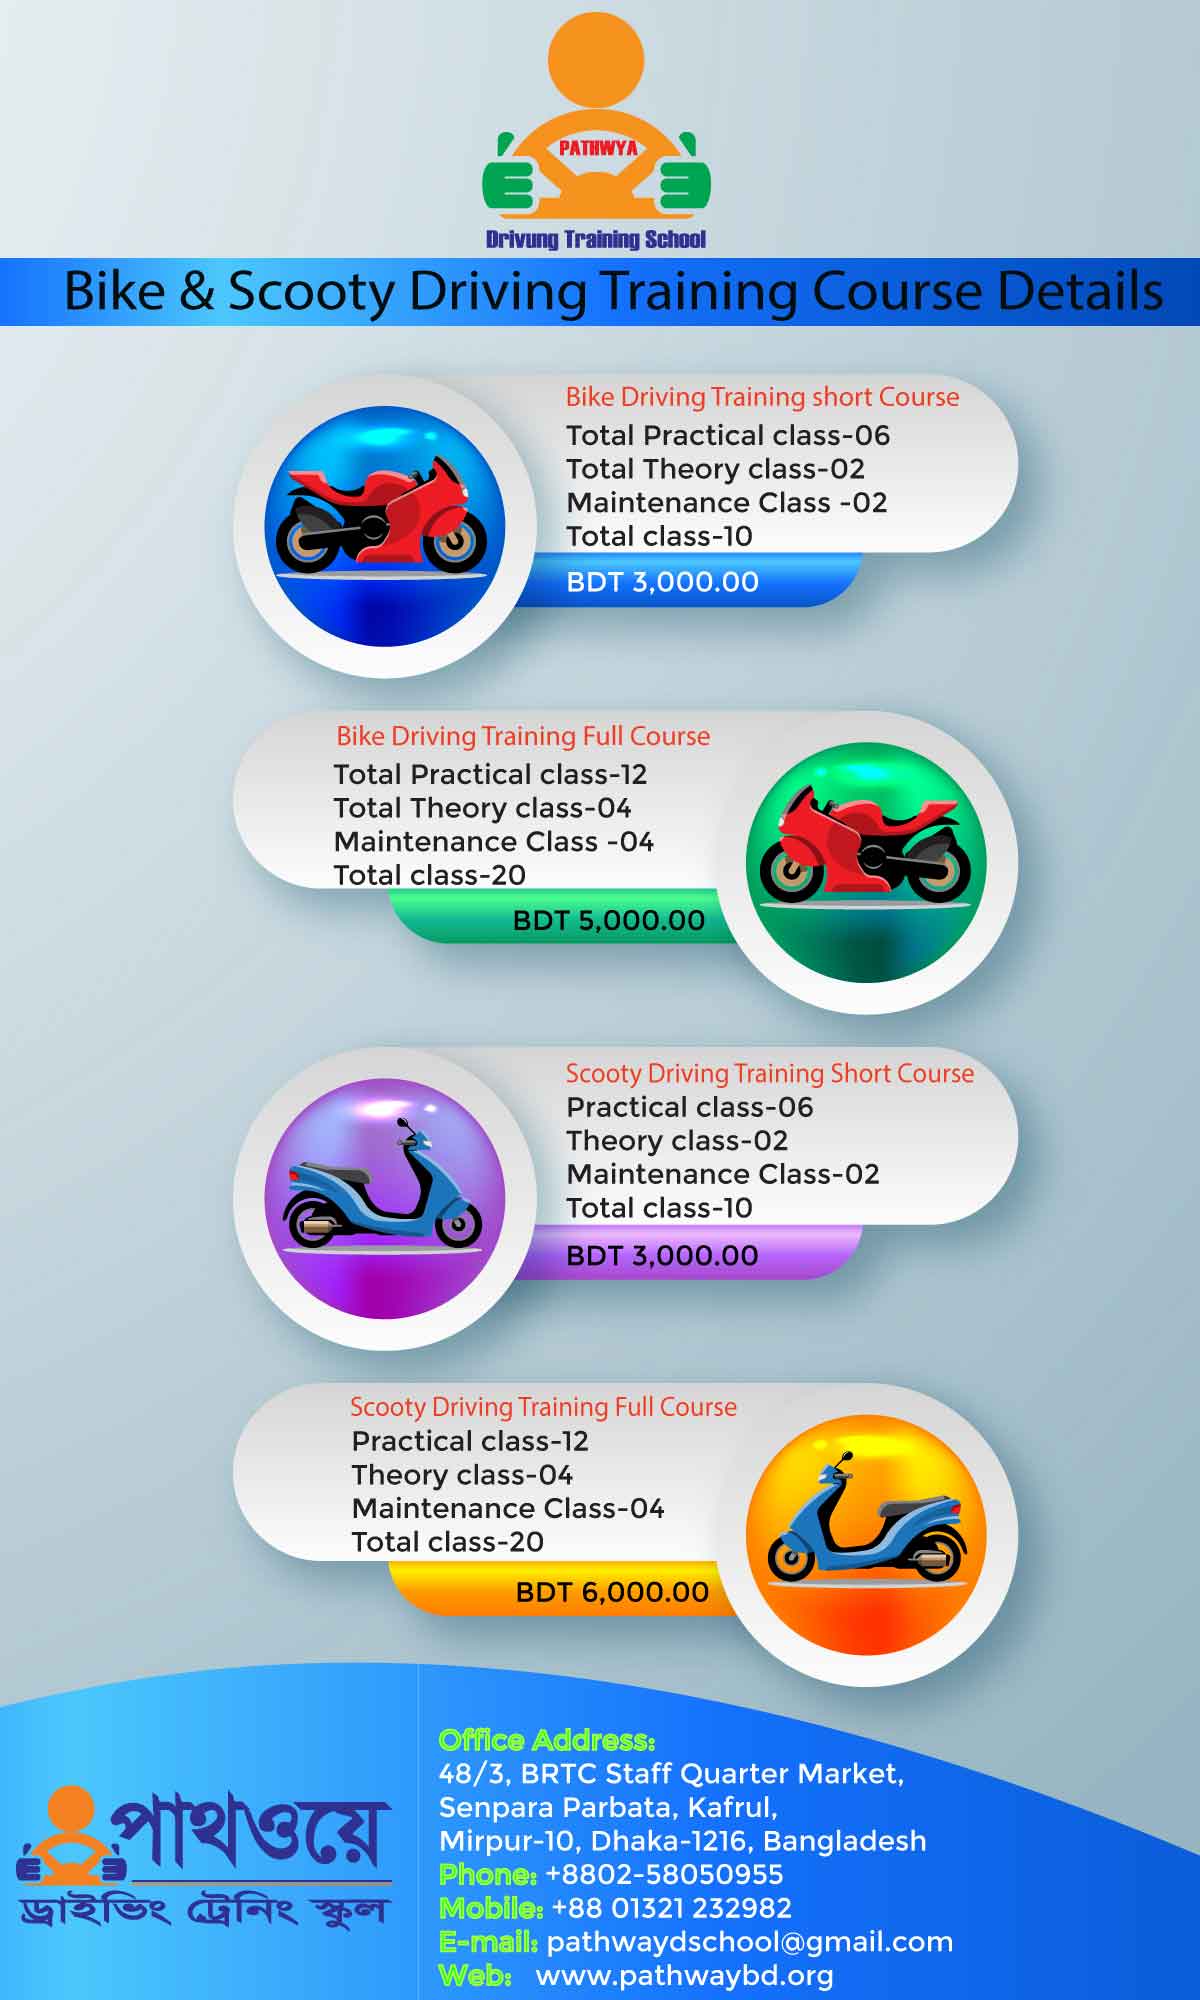 bike and Scooty Driving Training Course fees list- Details